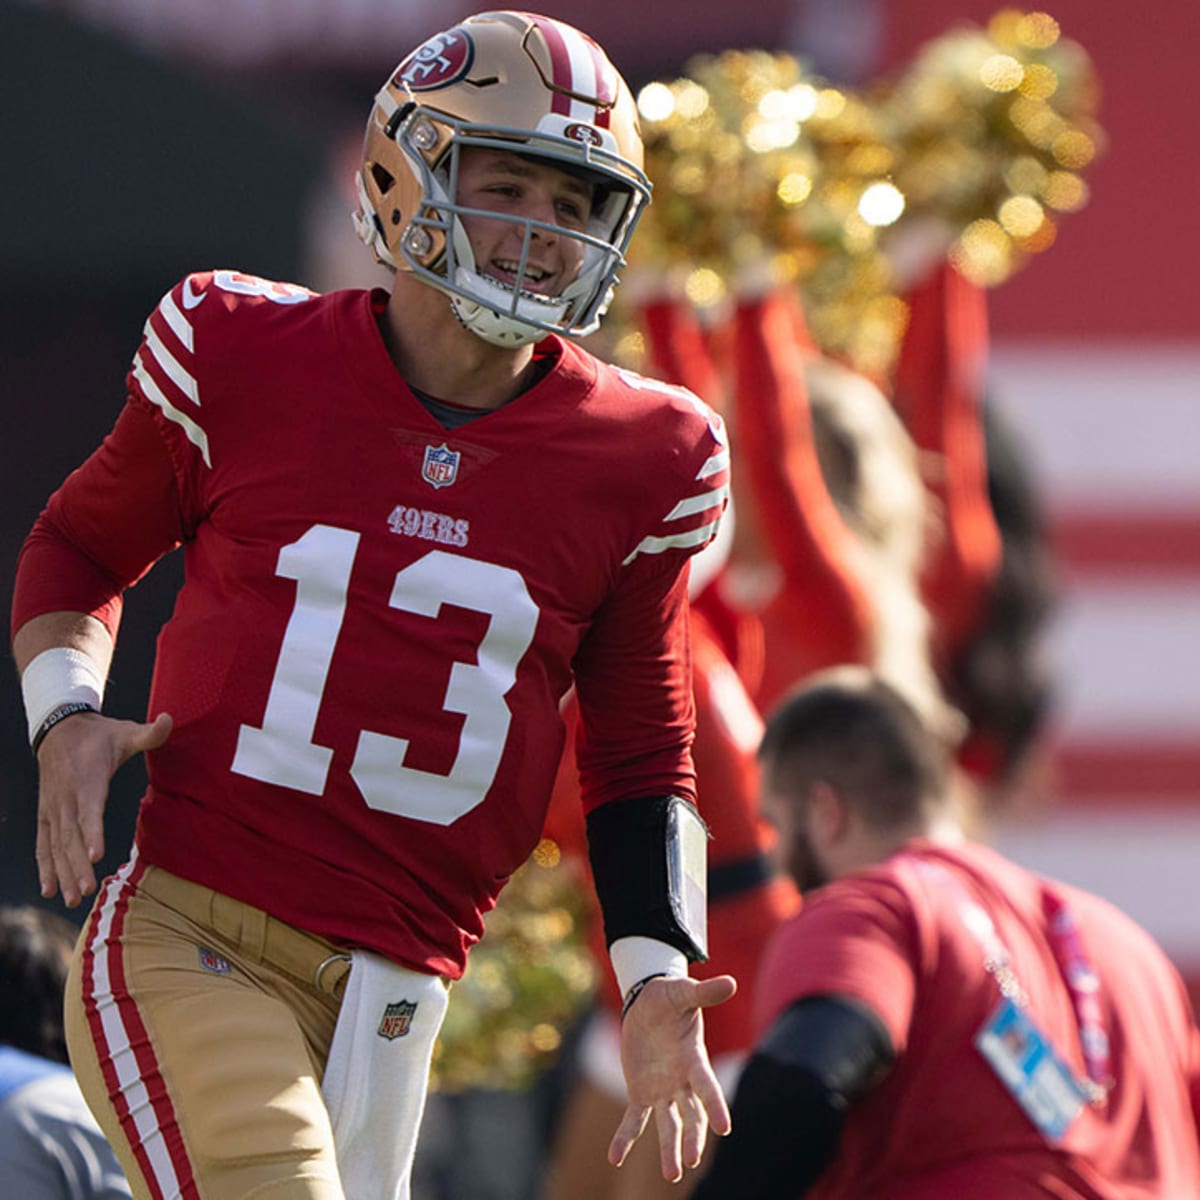 49ers question of the day: You can only keep 3, 49ers' uniform